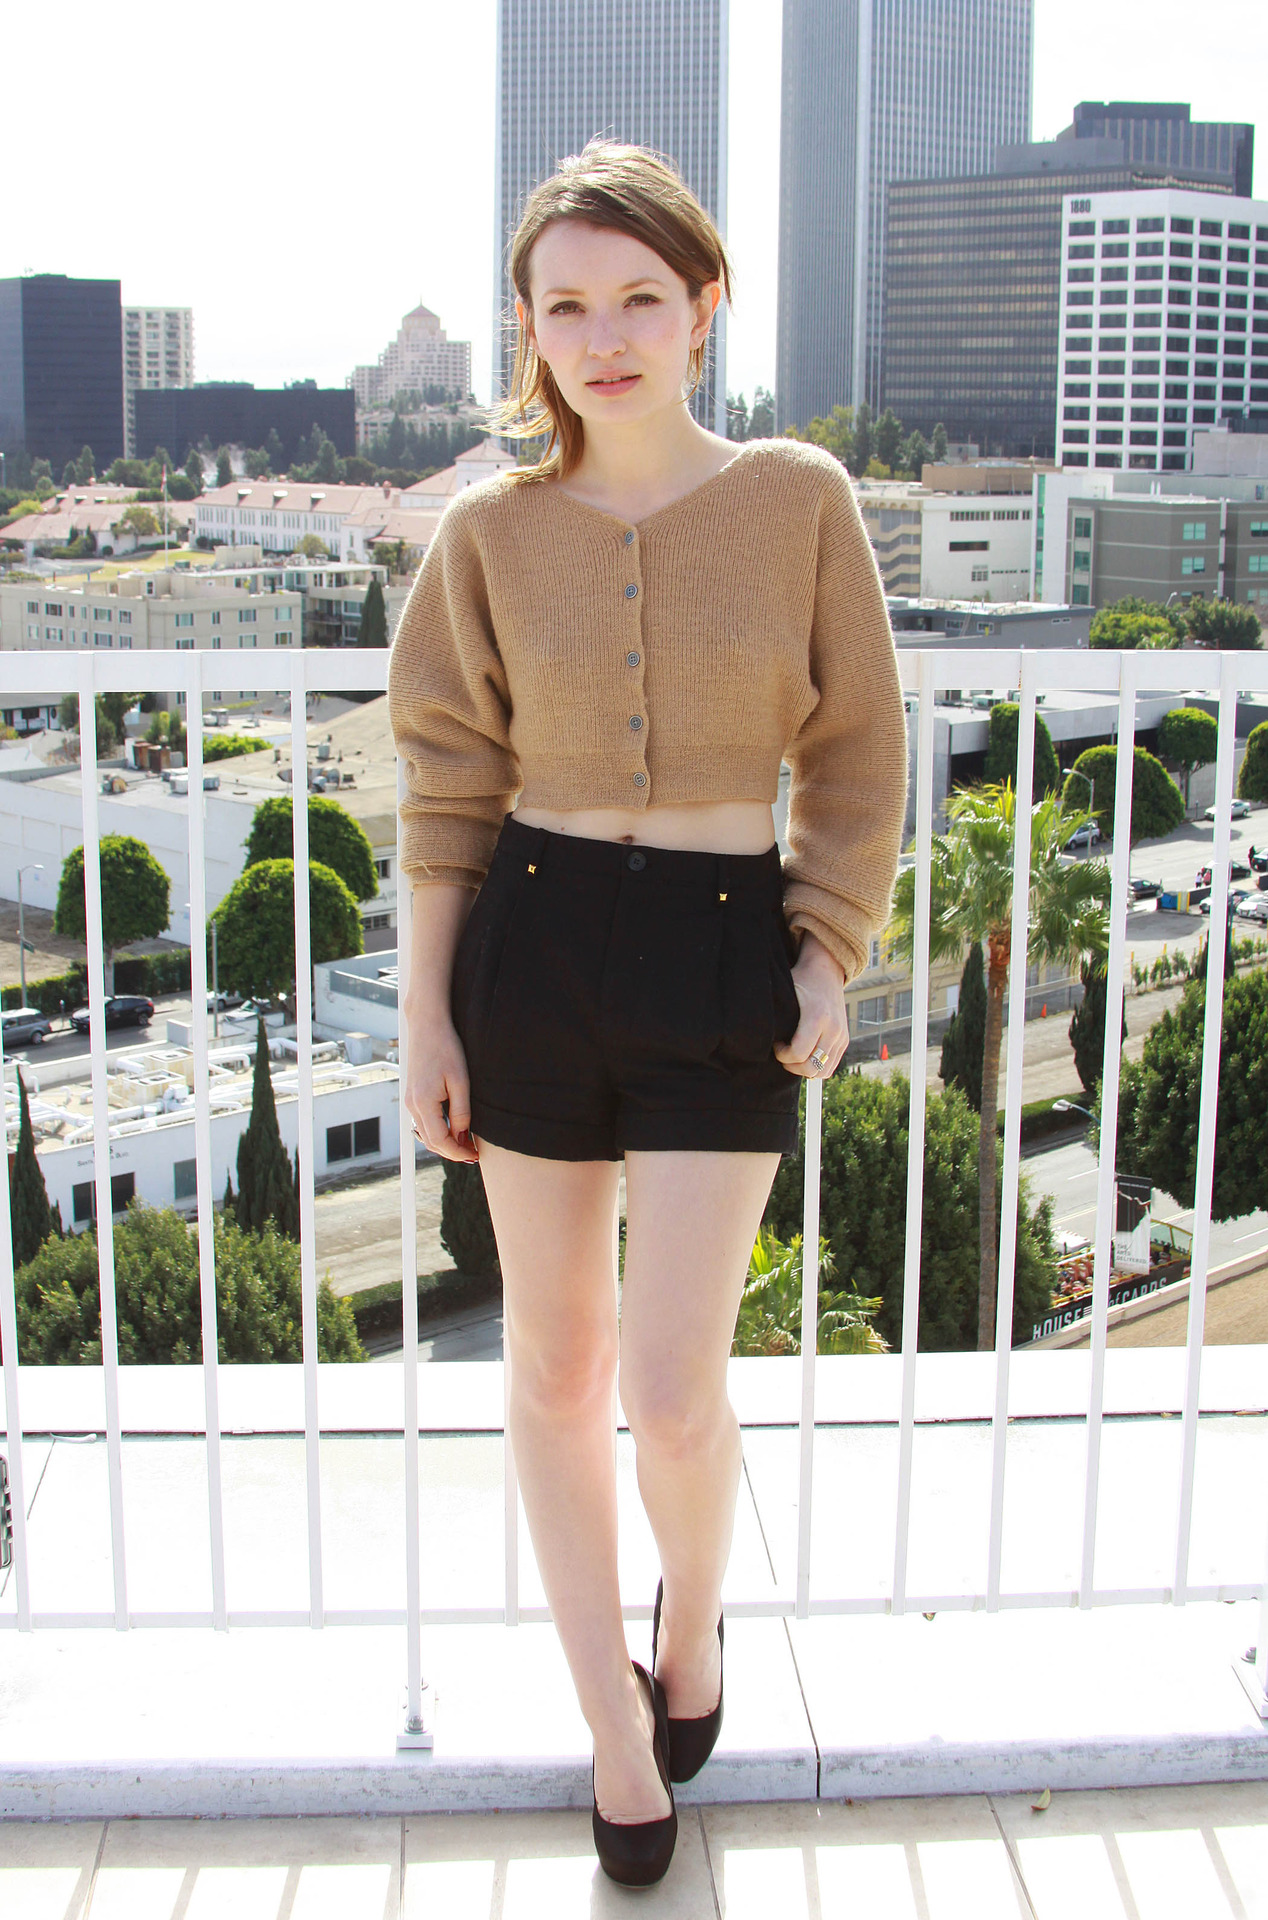 General photo of Emily Browning